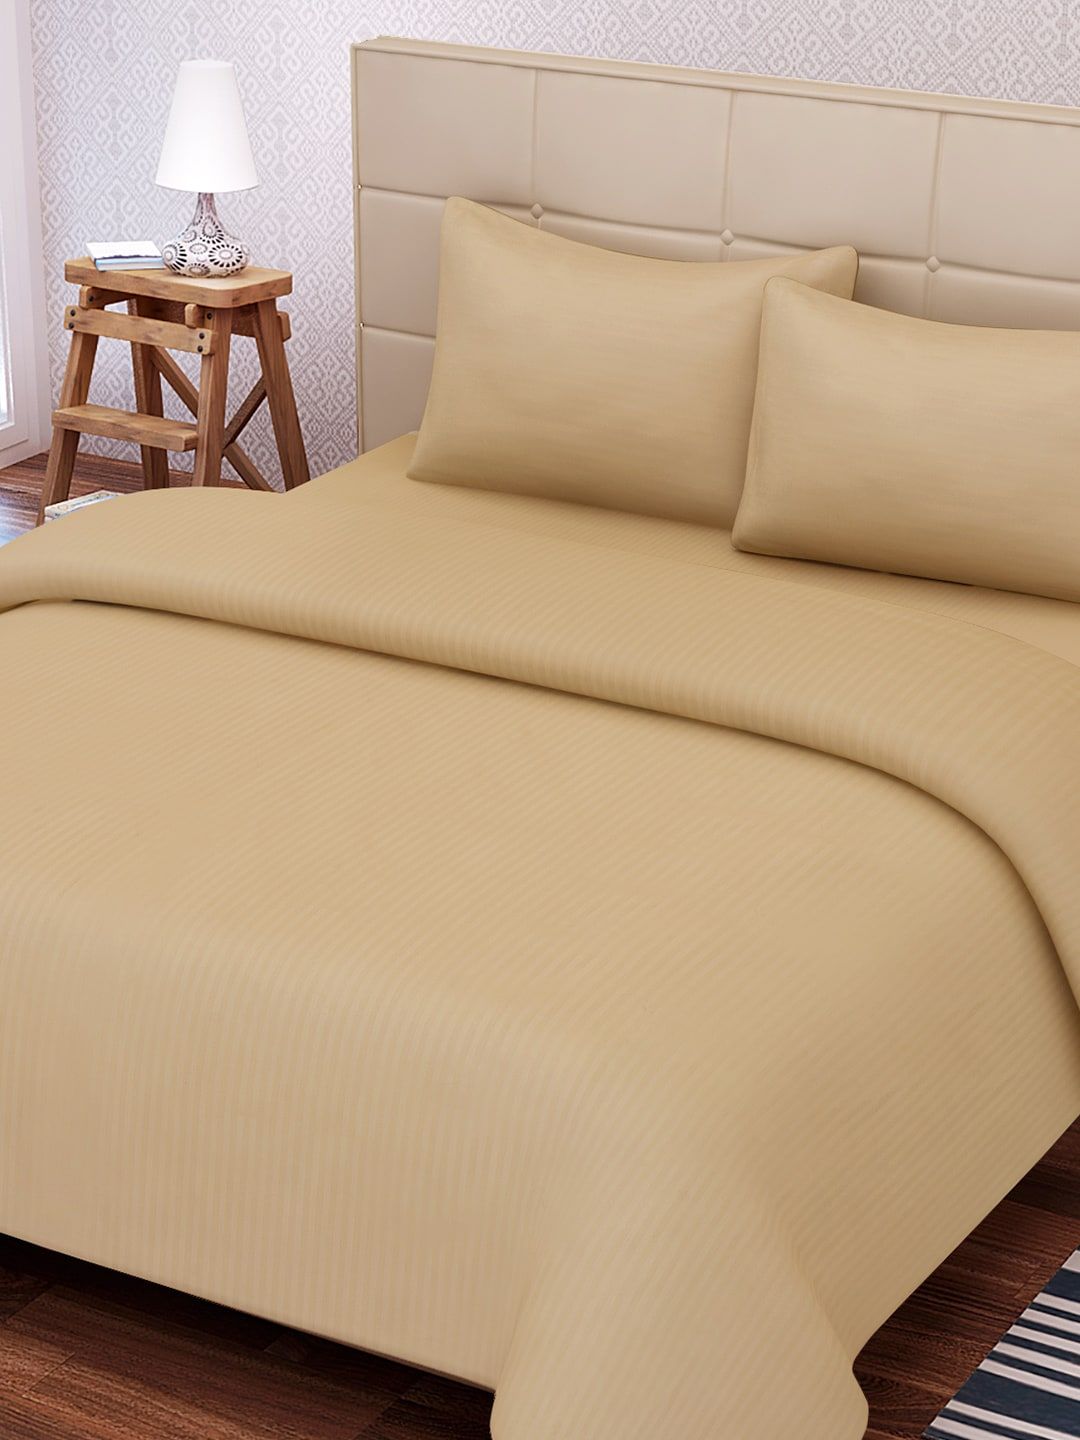 SEJ by Nisha Gupta Beige 220 TC Fine Cotton Queen Bedsheet with 2 Pillow Covers Price in India